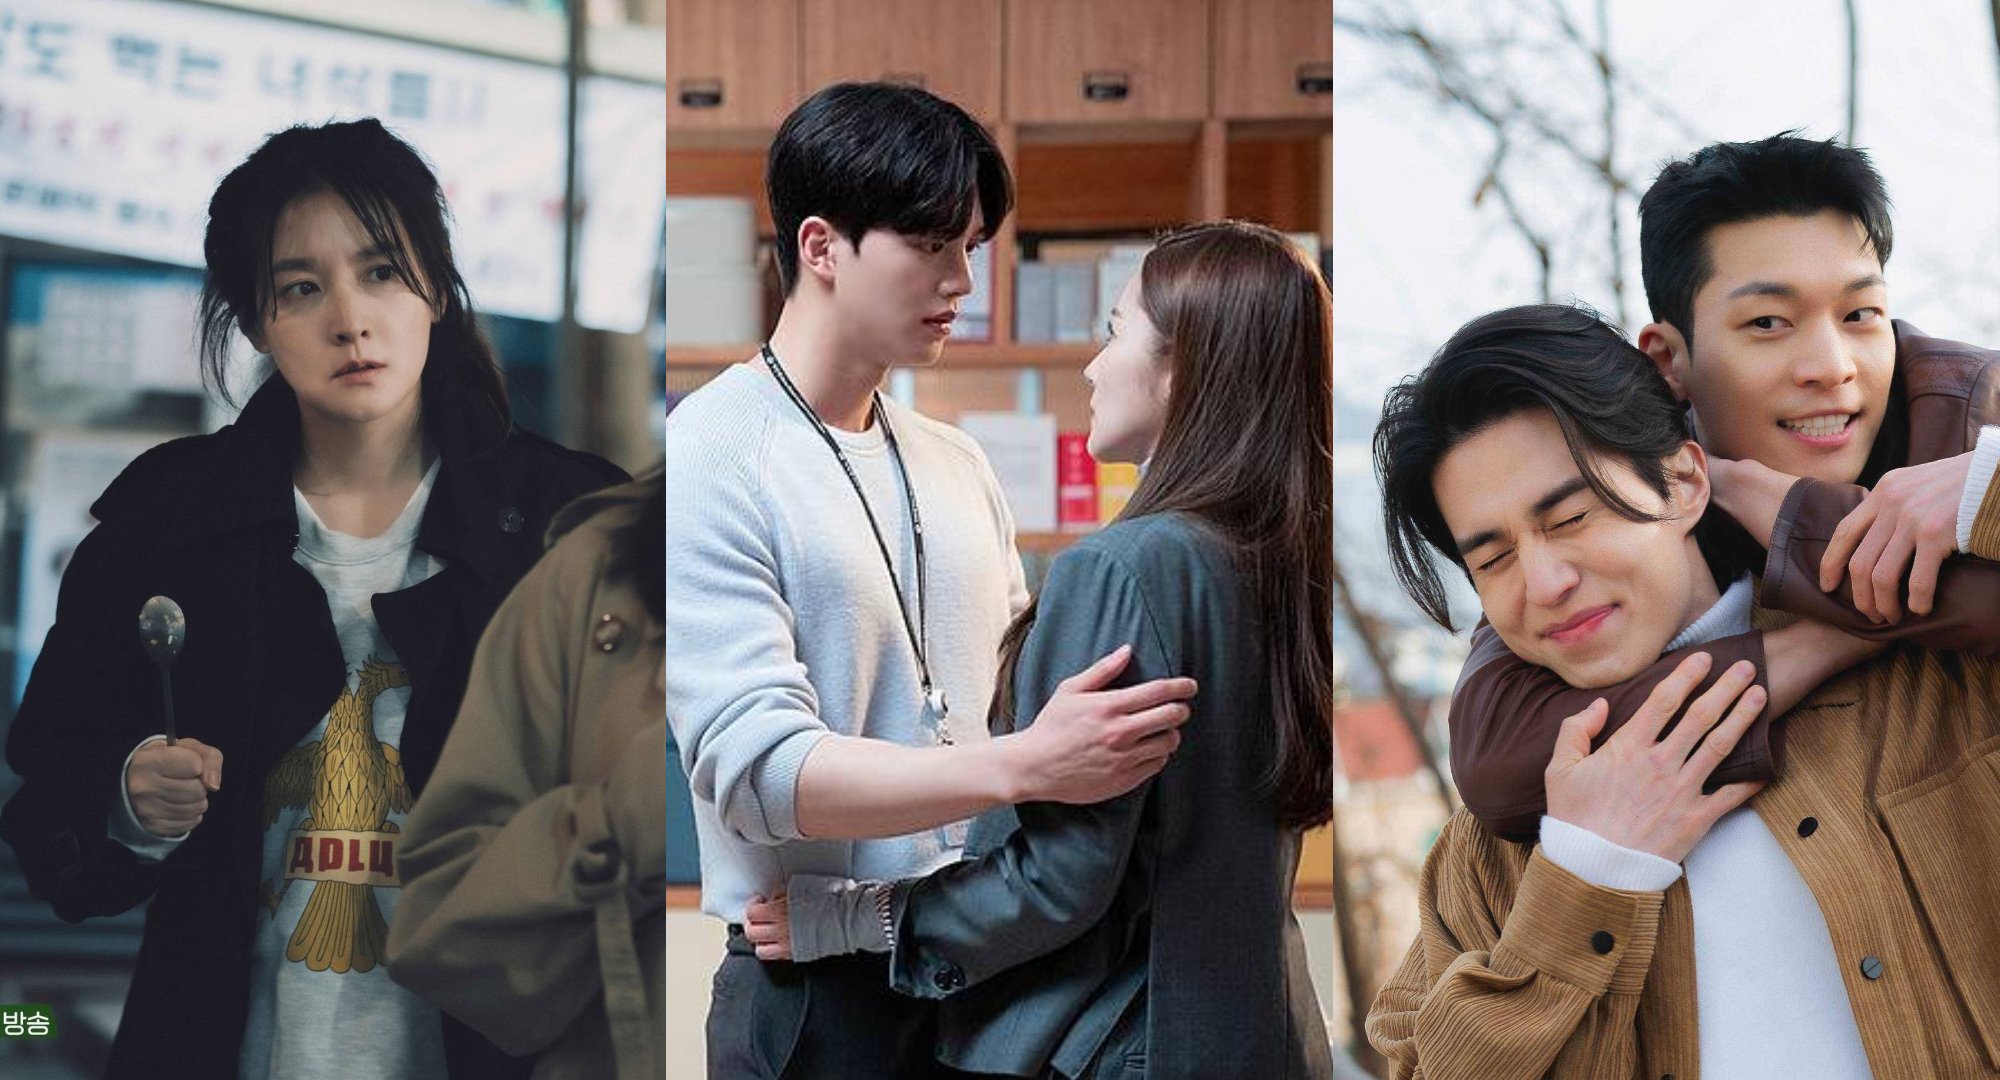 Unfinished K-dramas 'Inspector Koo,' 'Forecasting Love and Weather,' and 'Bad and Crazy.'